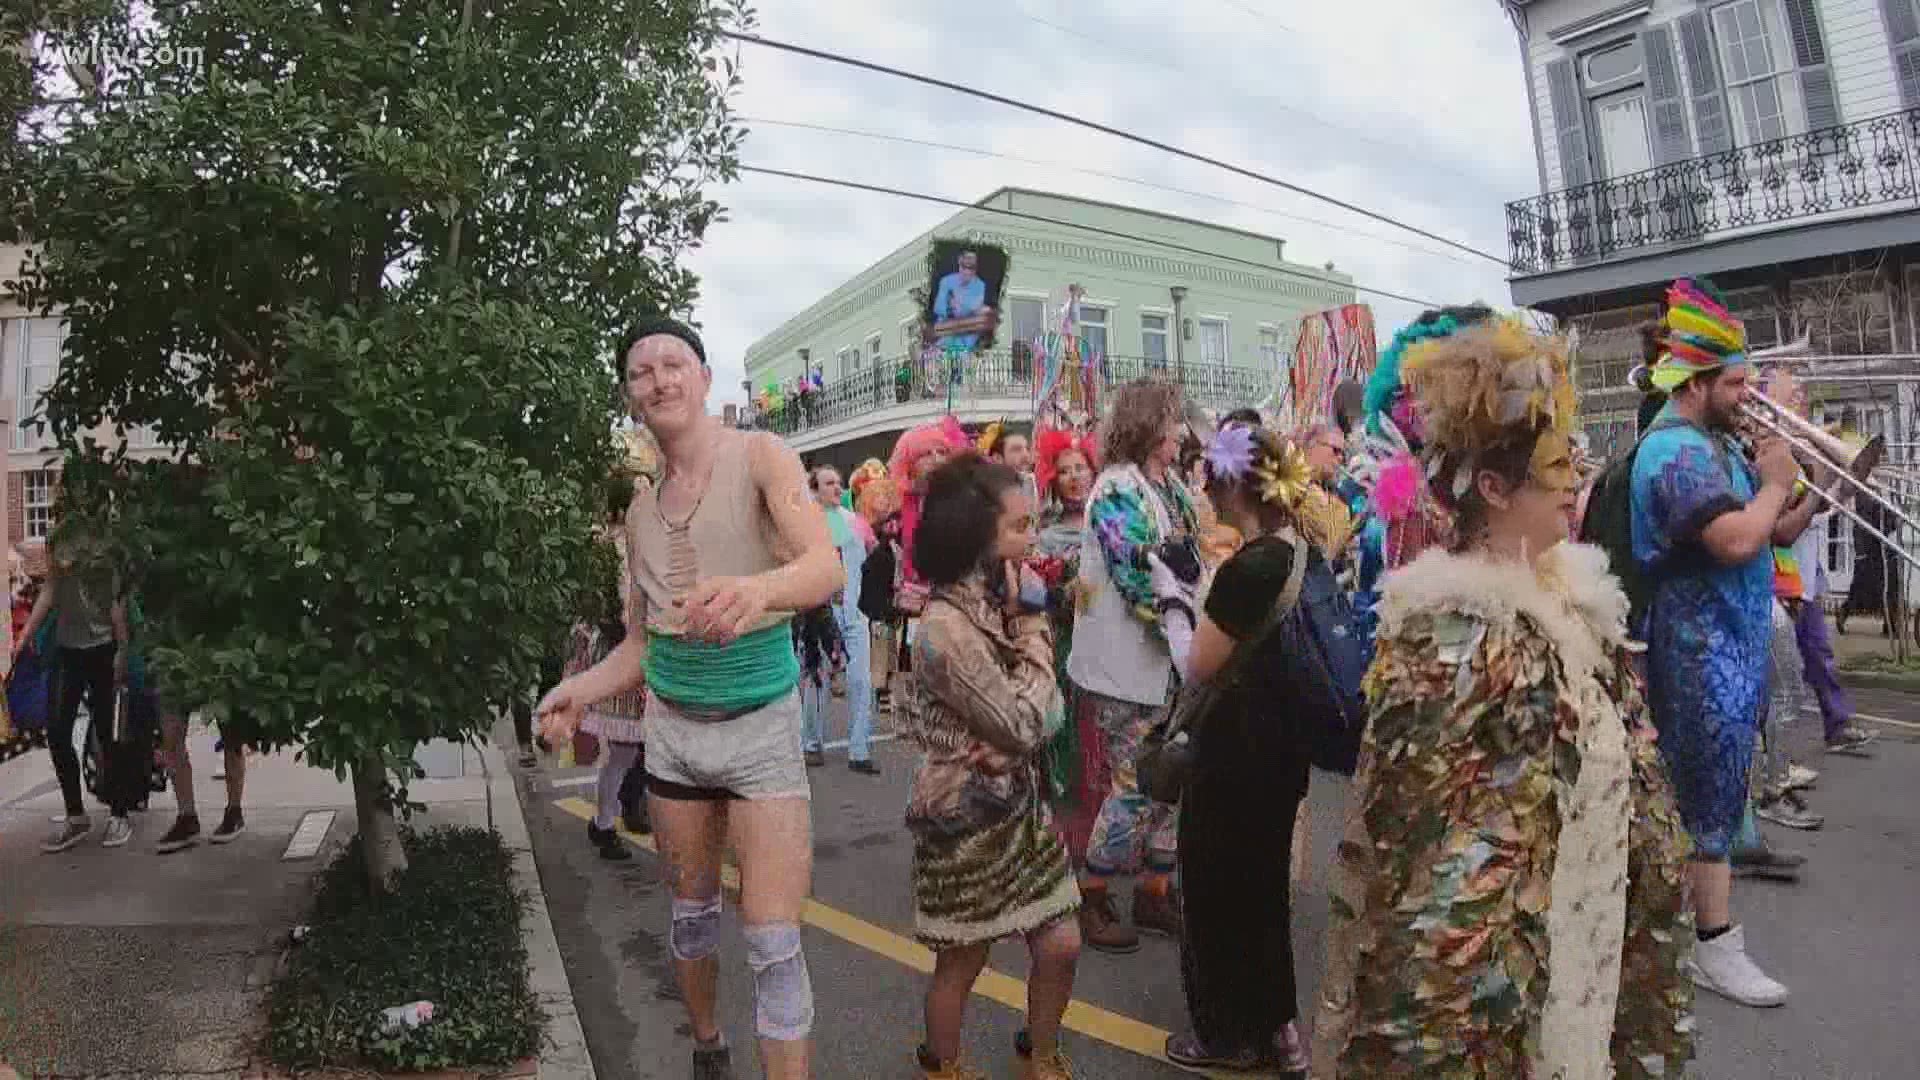 Mayor Cantrell wants everyone to follow the rules during Mardi Gras but crowds gathering on Bourbon street ahead of the carnival season is causing great concern.